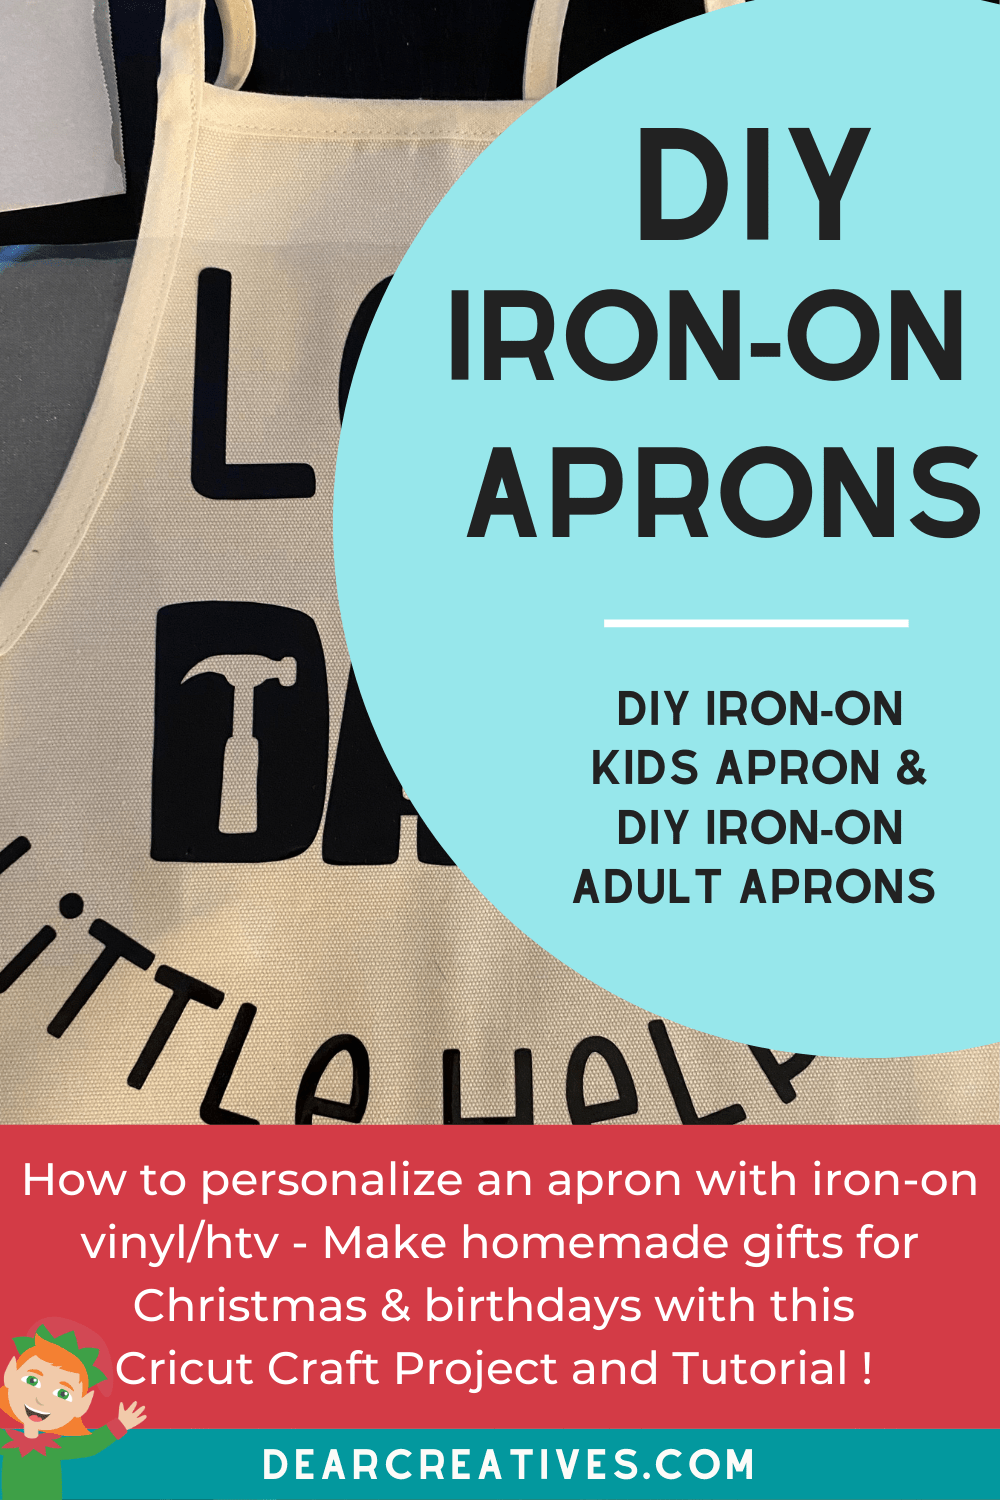 DIY Iron-On Apron Cricut Craft - Tutorial and tips for making personalized aprons with iron-on vinyl -htv. - DearCreatives.com